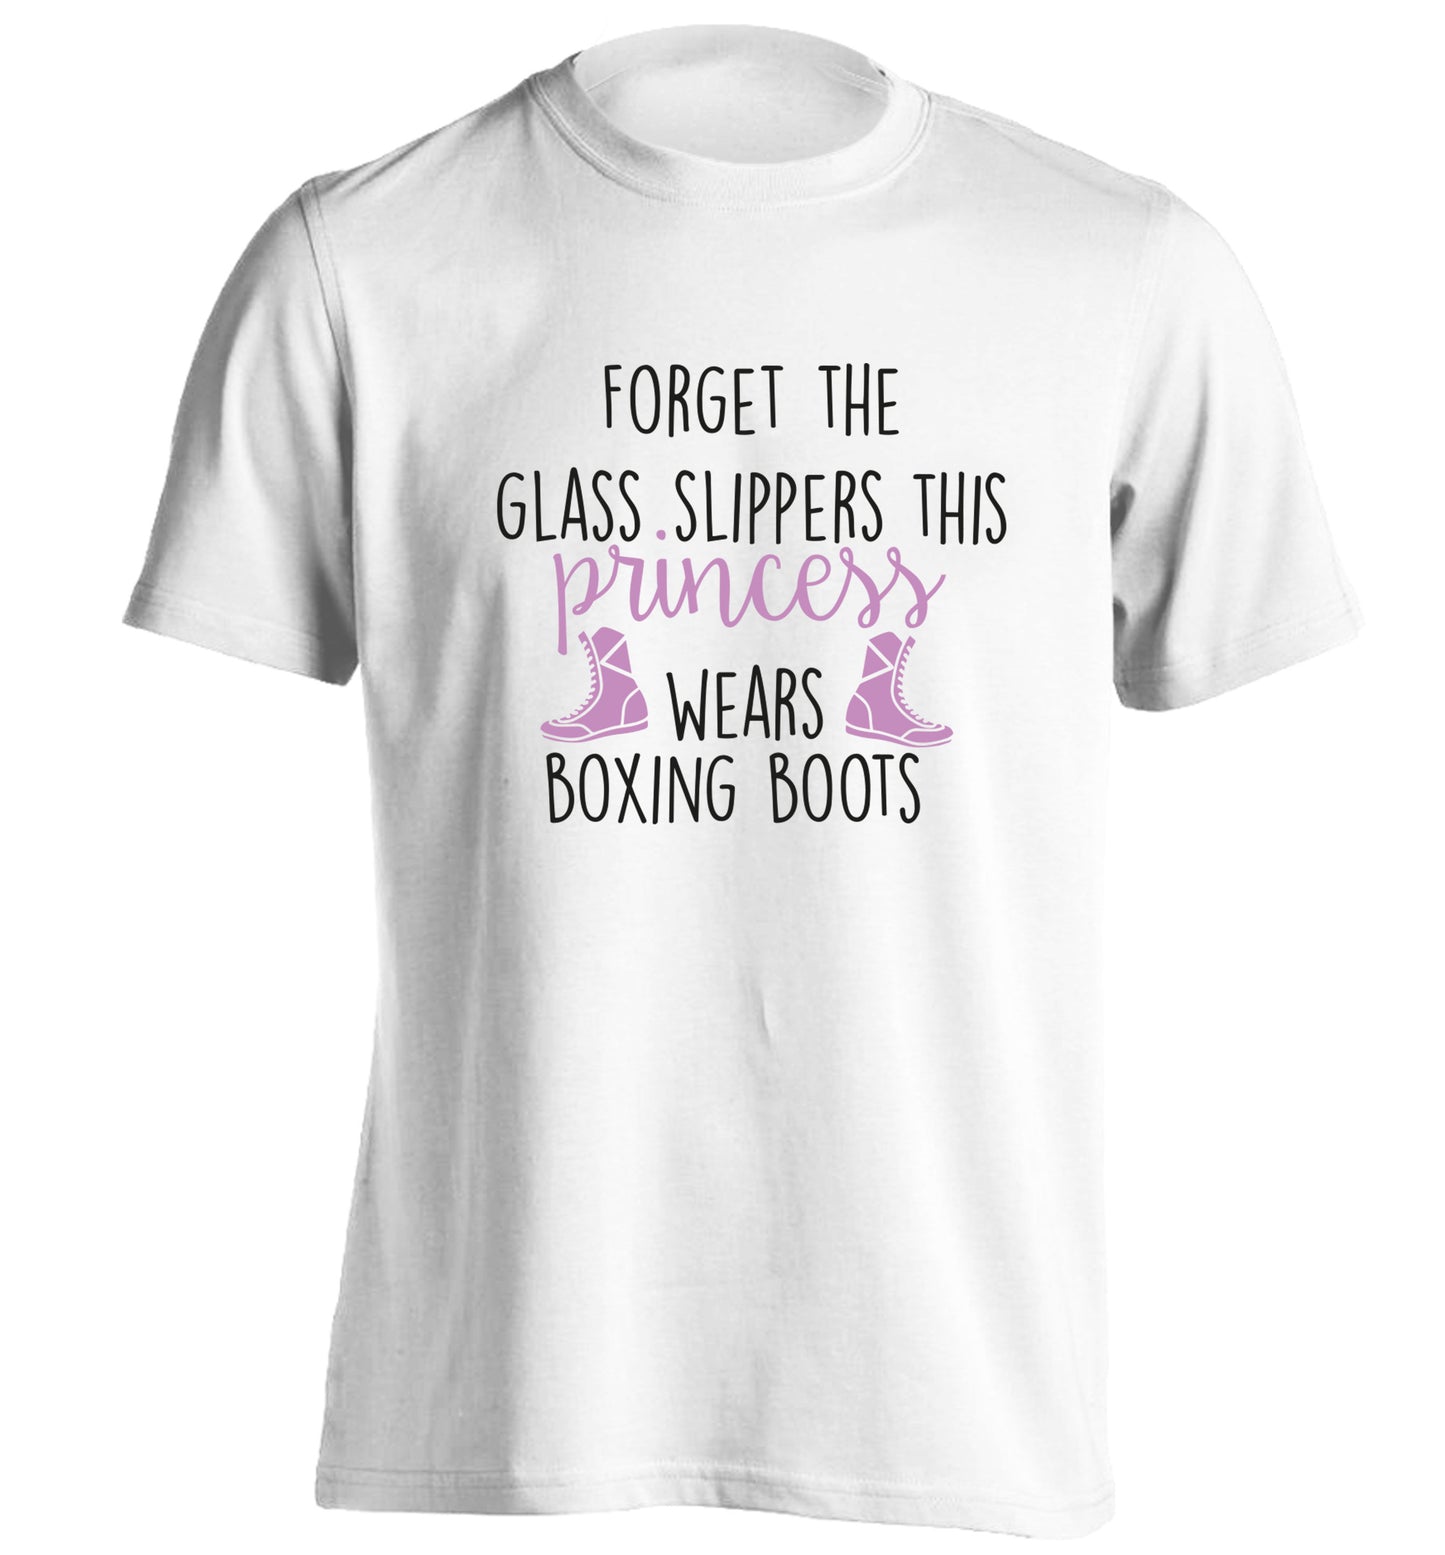 Forget the glass slippers this princess wears boxing boots adults unisex white Tshirt 2XL